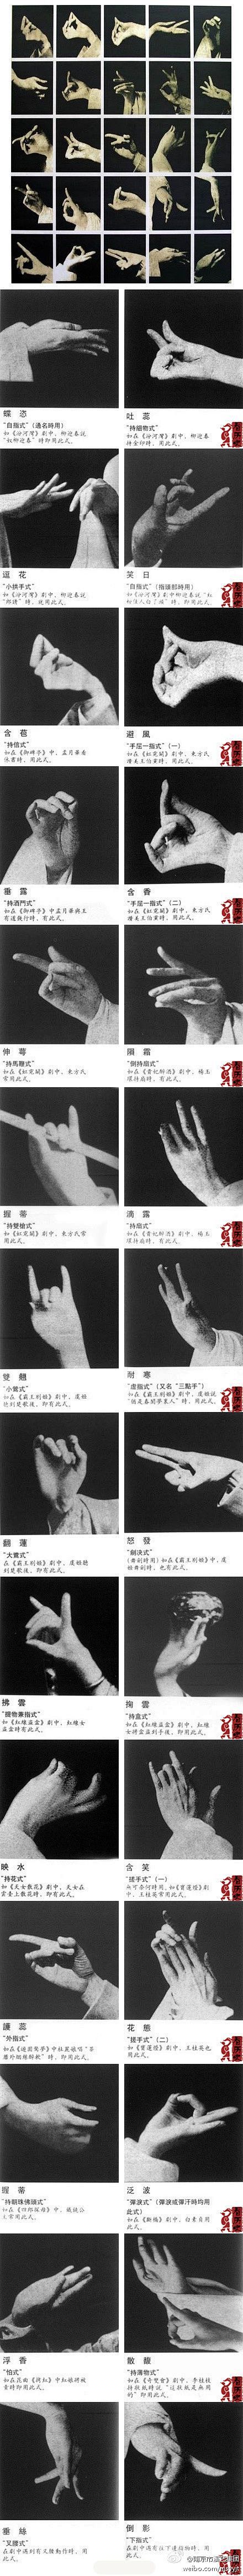 Hand gestures and th...